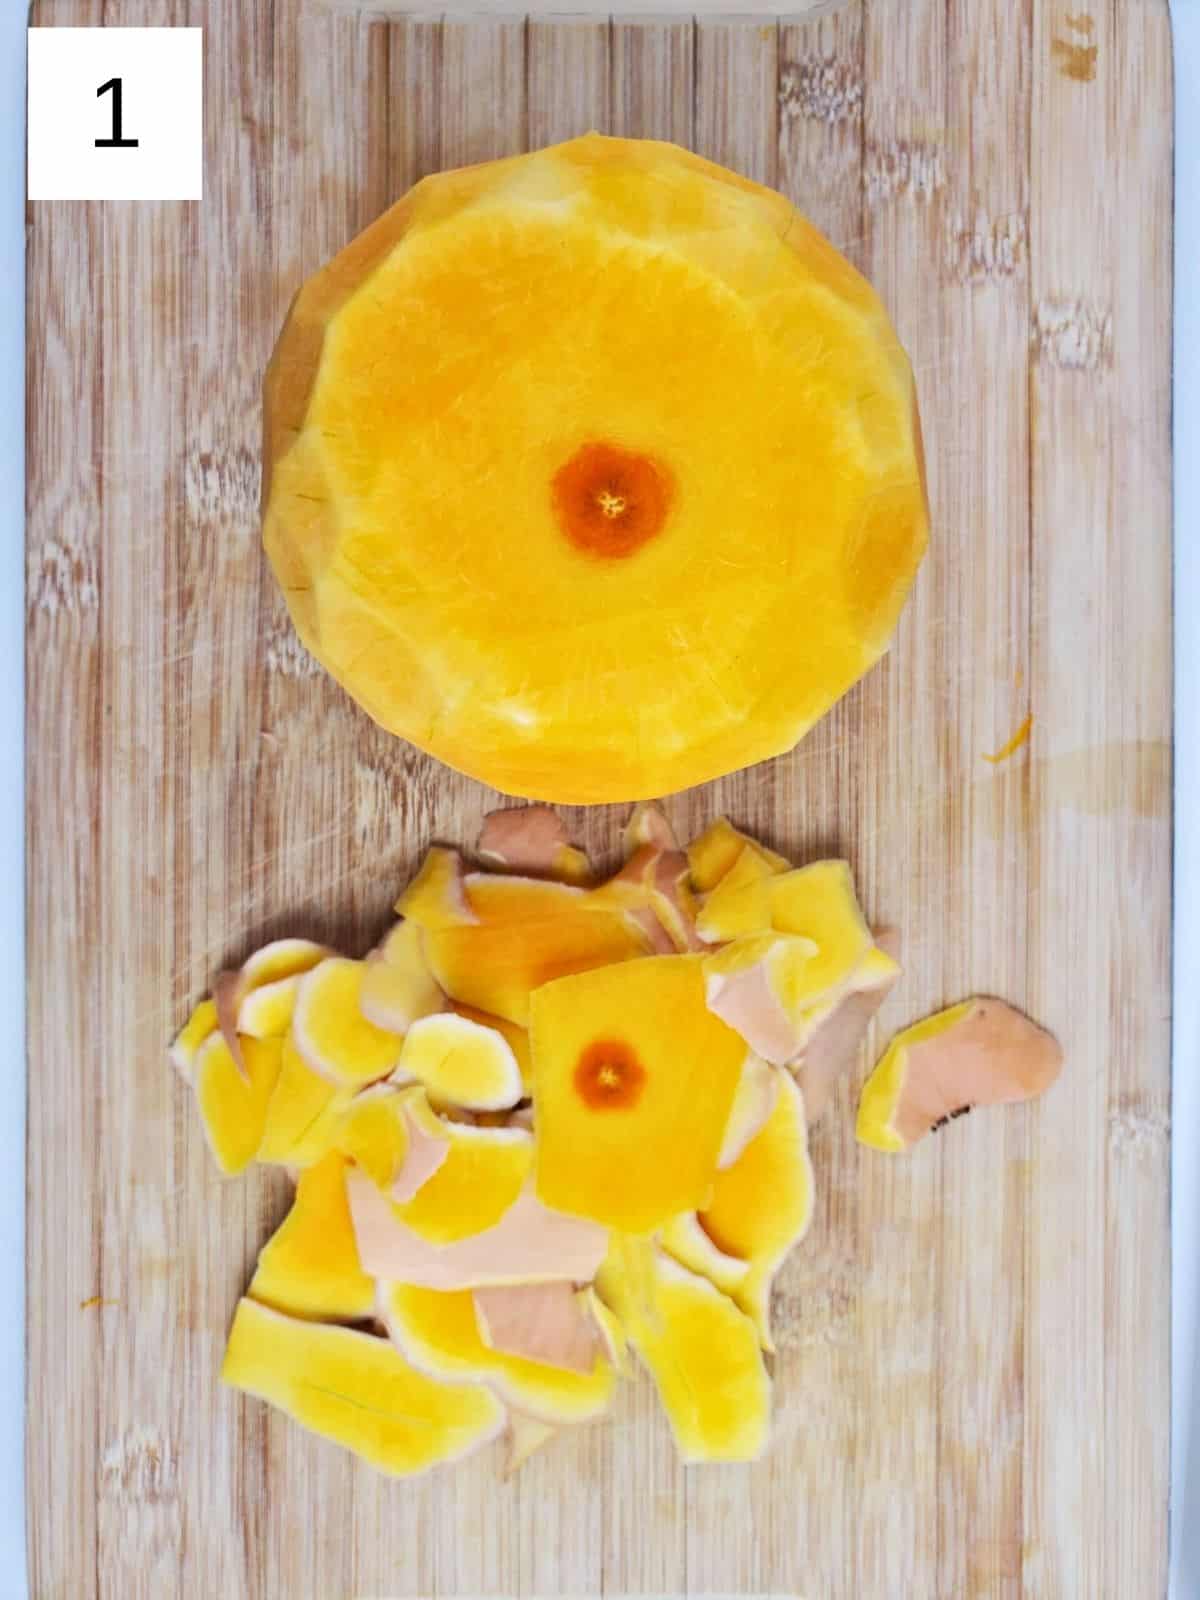 peeled butternut squash on a wooden chopping board.